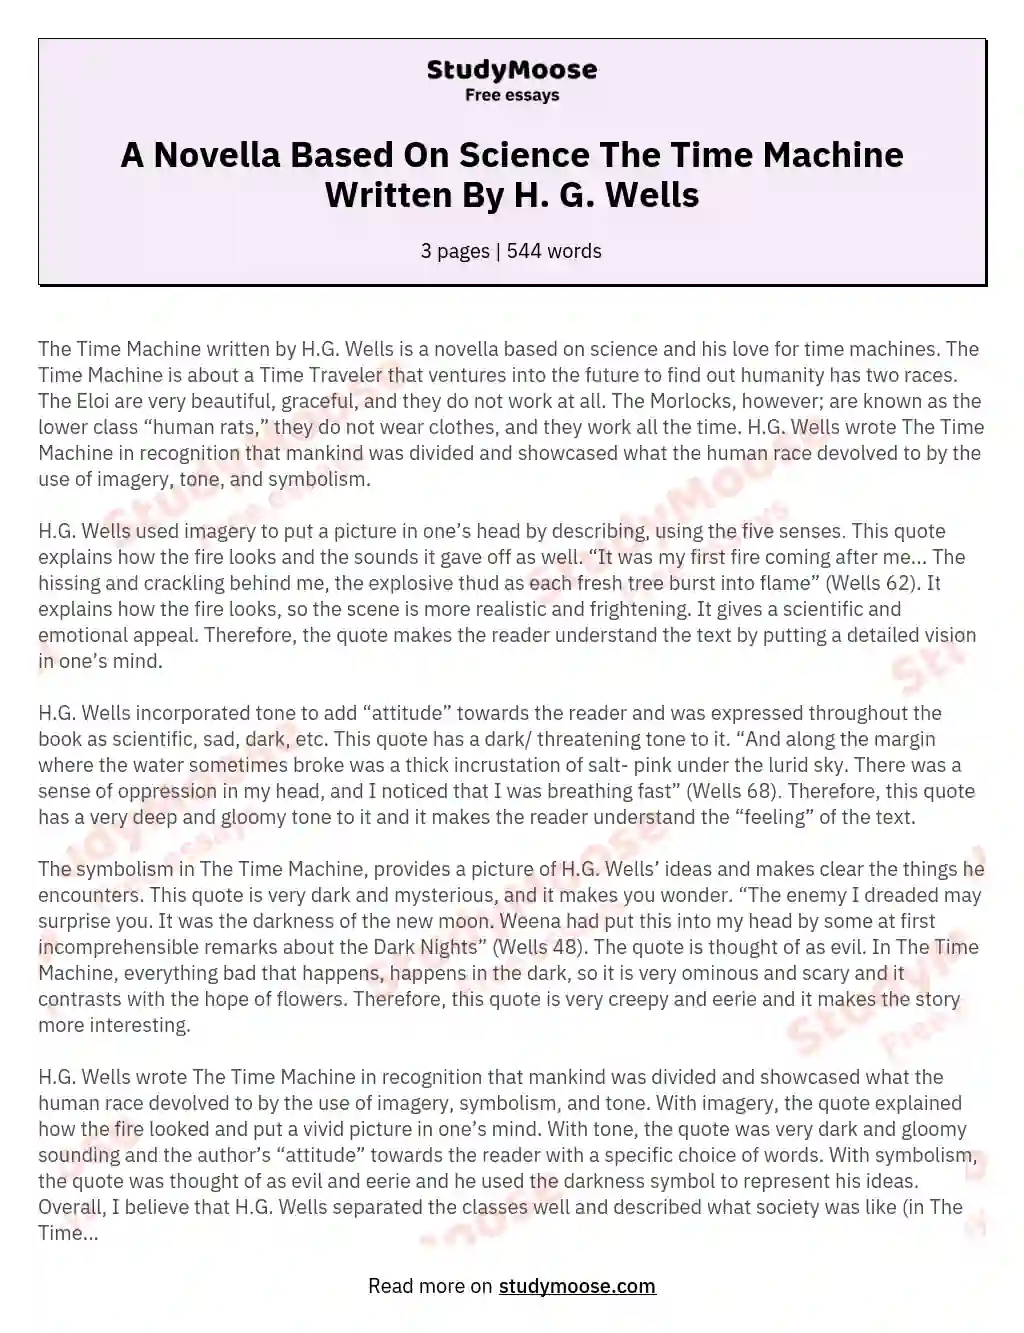 A Novella Based On Science The Time Machine Written By H. G. Wells essay